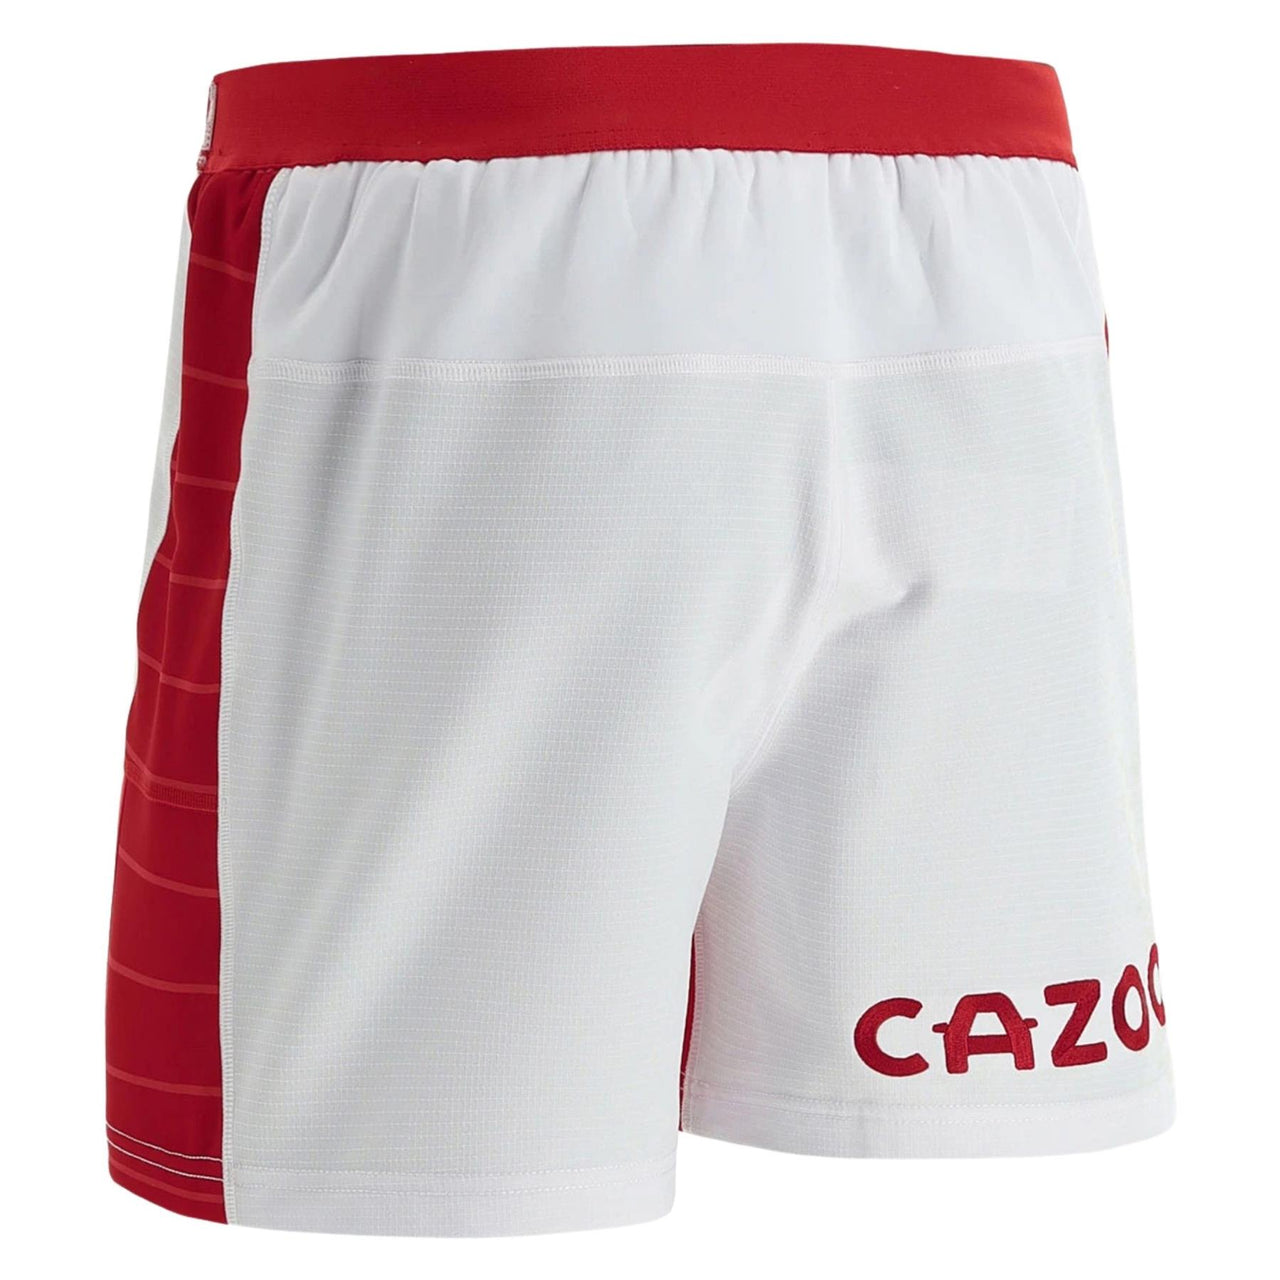 Macron Wales Rugby Mens Home Replica Shorts | White | 2021/22